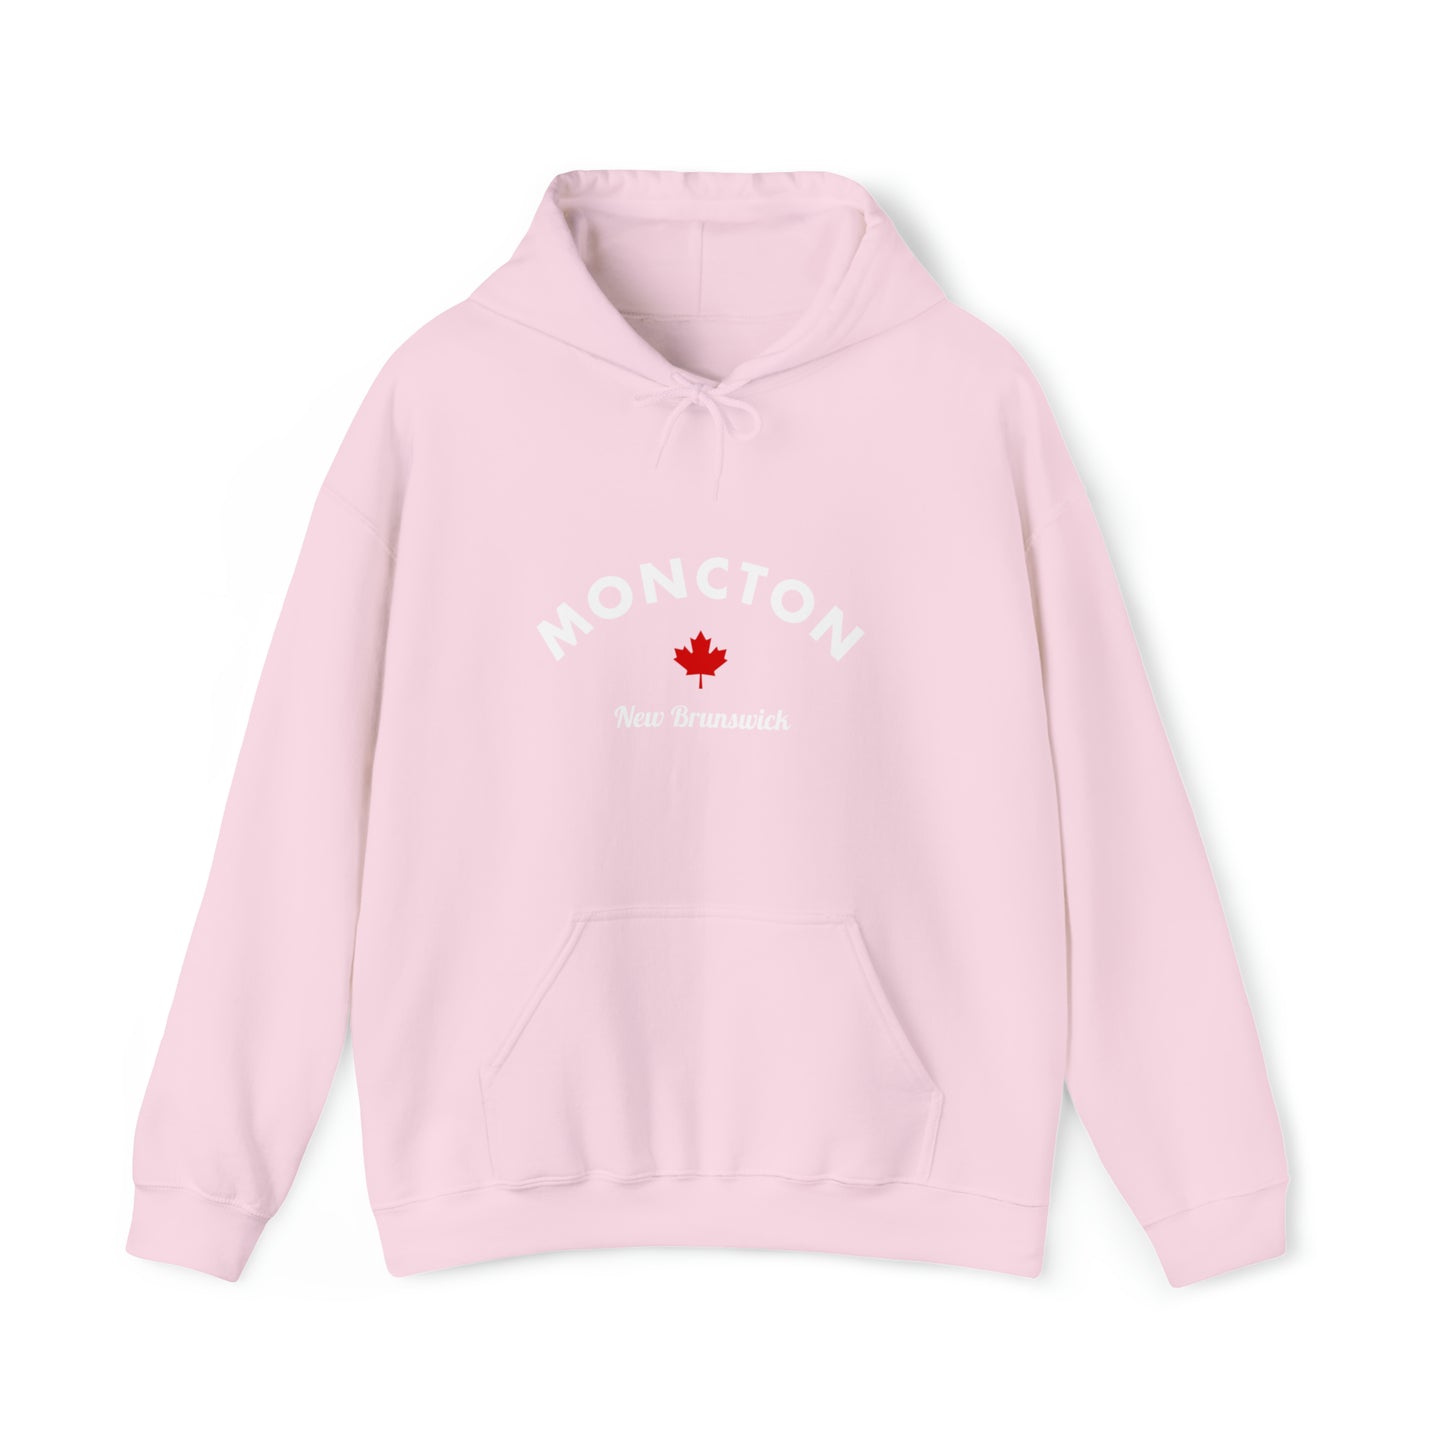 S Light Pink Moncton Hoodie from HoodySZN.com